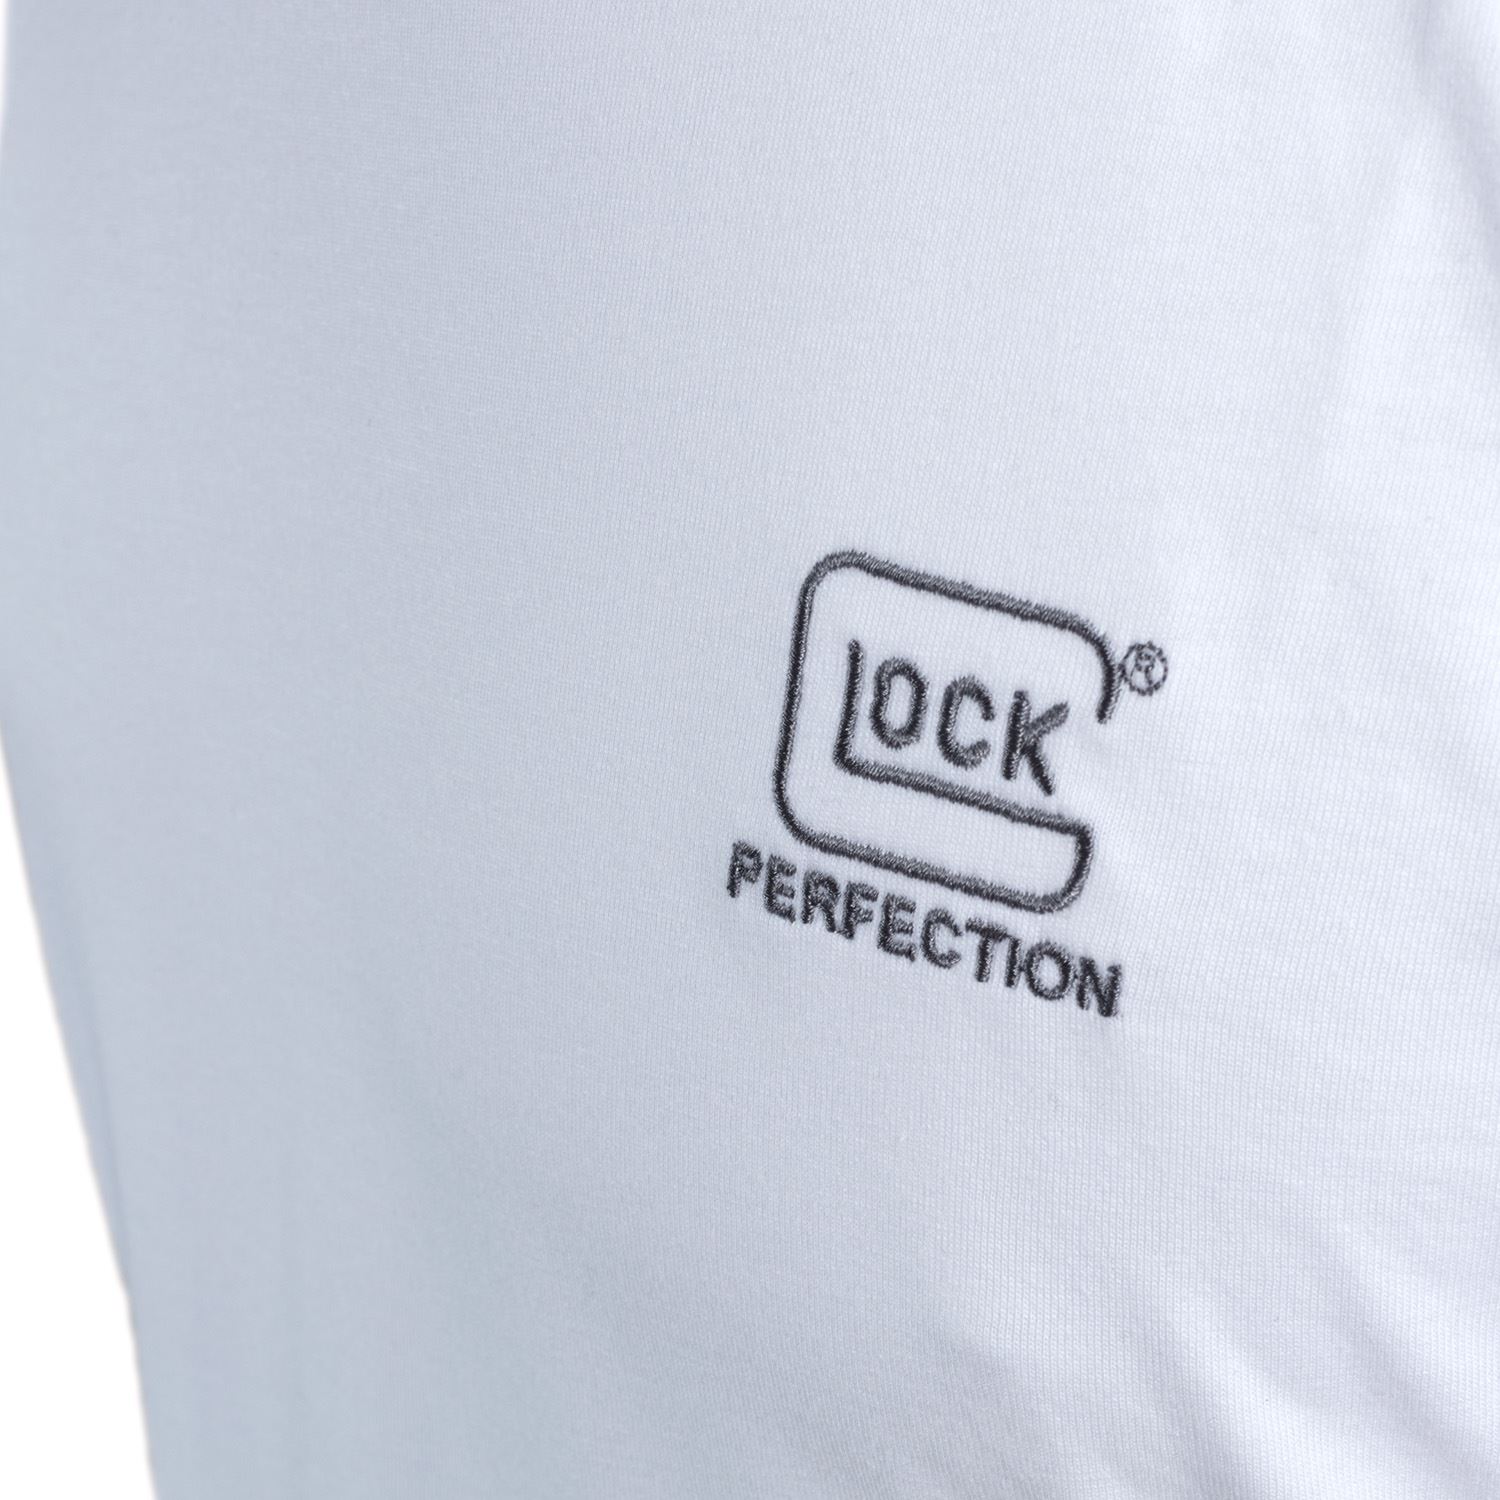 GLOCK Perfection | GLOCK Workwear Collection Polo